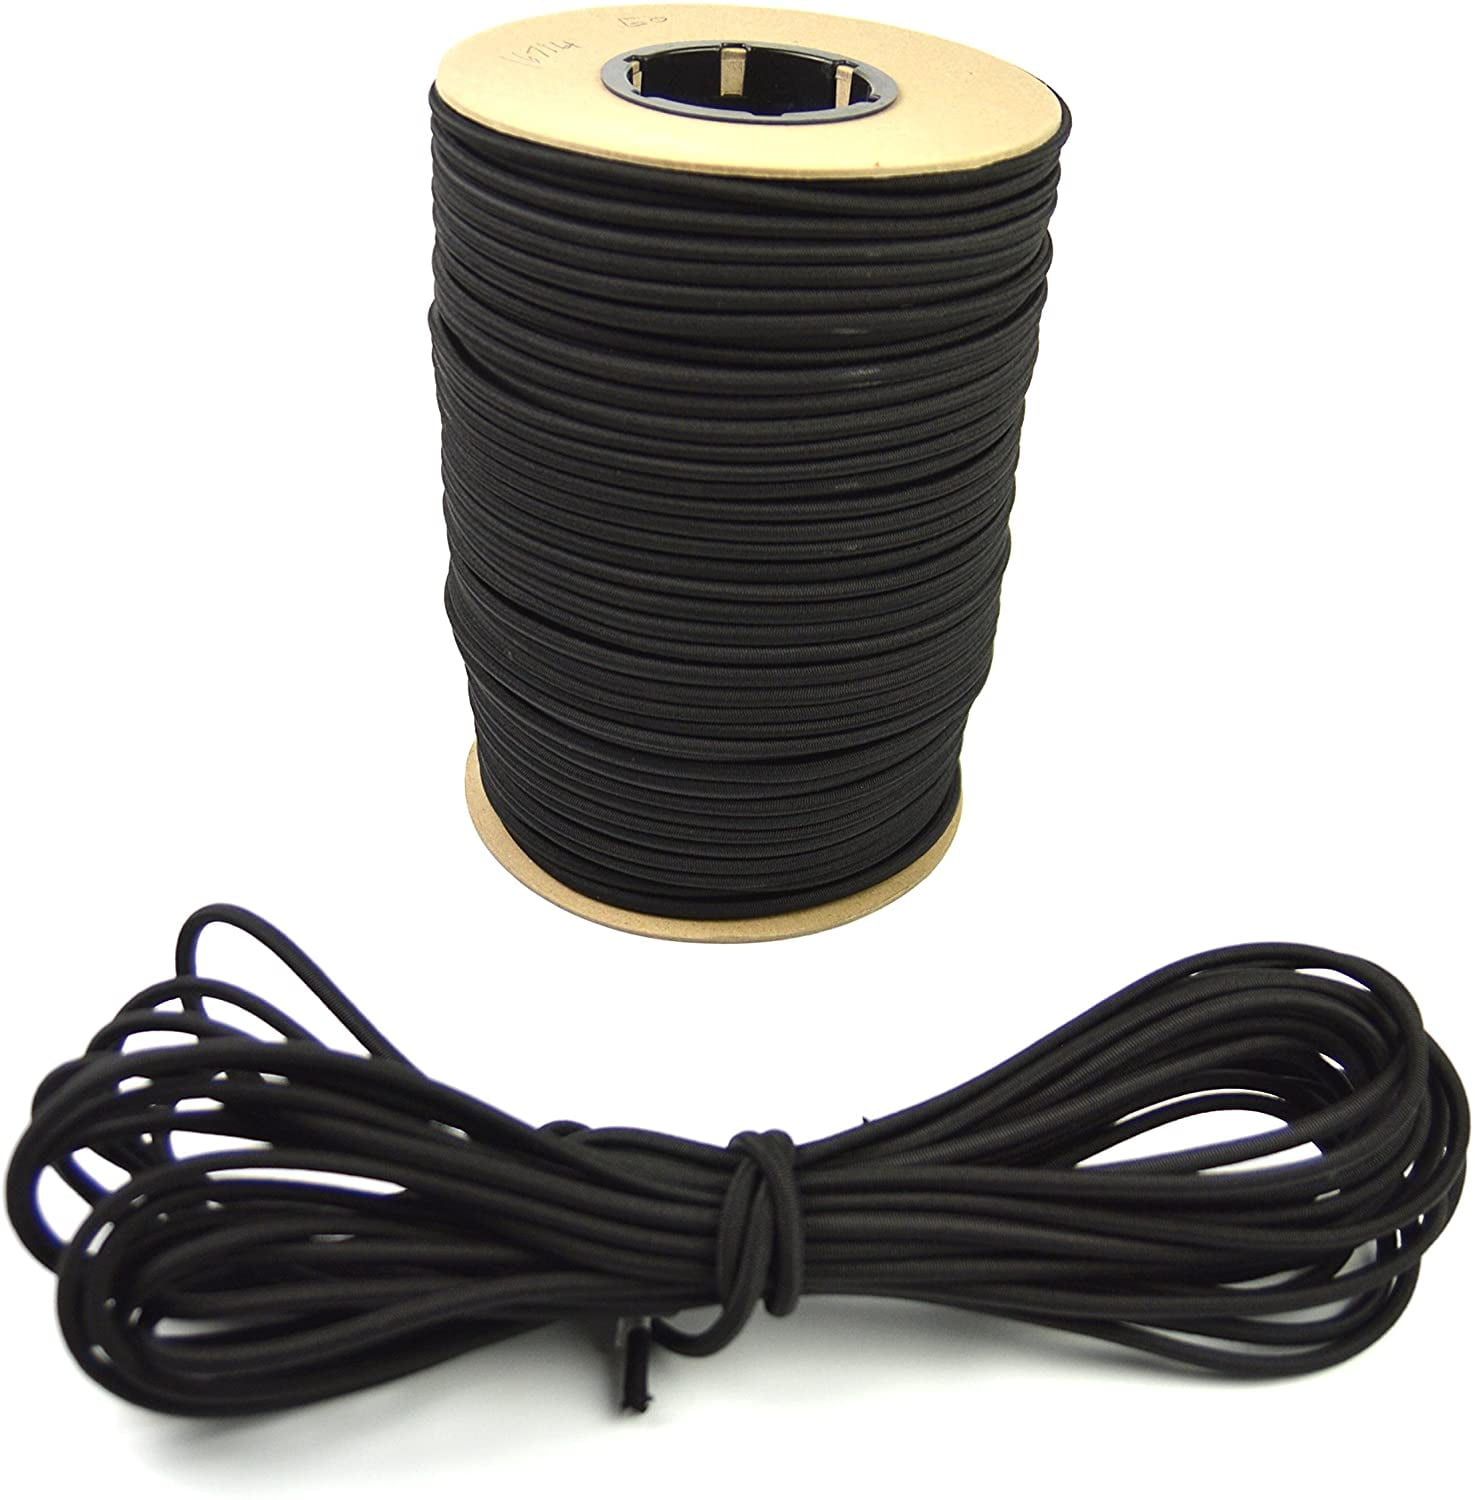 BLK 1/8" X 500 FT Bungee Cord Shock Cord Bungie Cord Marine Grade Made in USA!! 